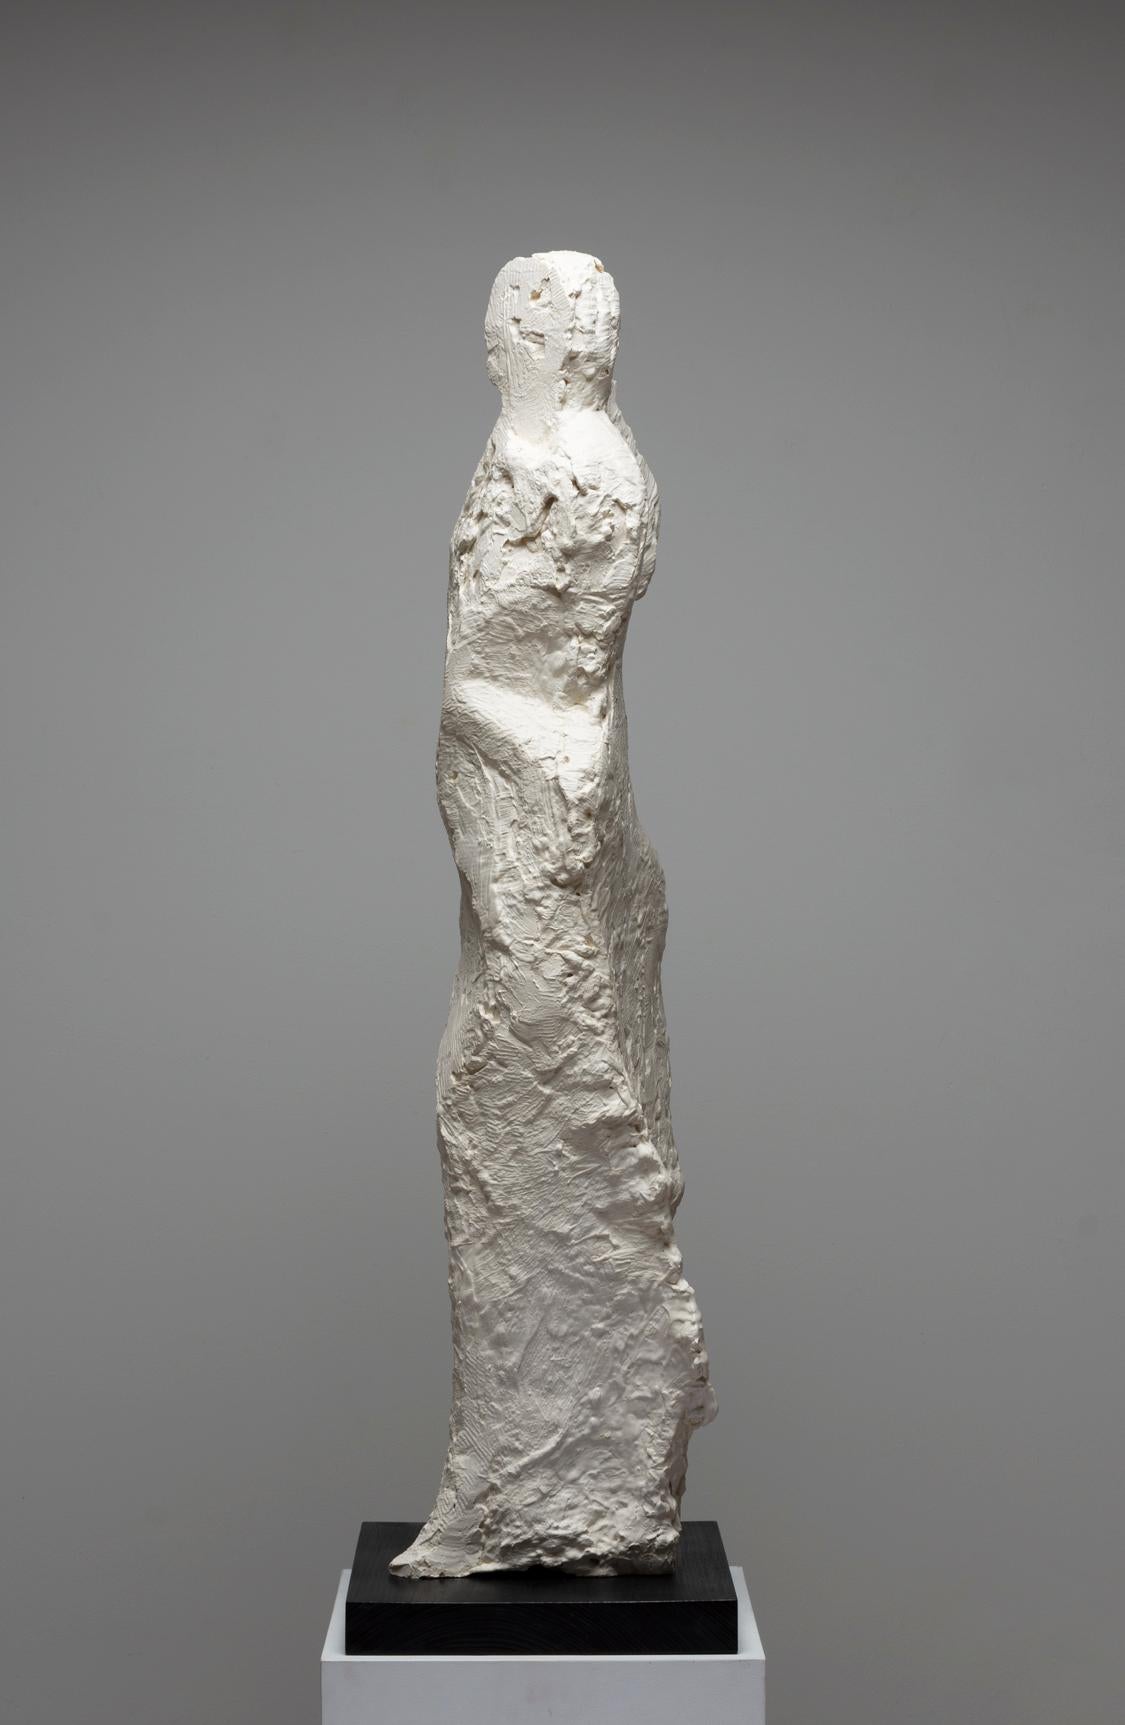 Full of Abandon, Full of Grace - Gray Figurative Sculpture by Michael O'Keefe